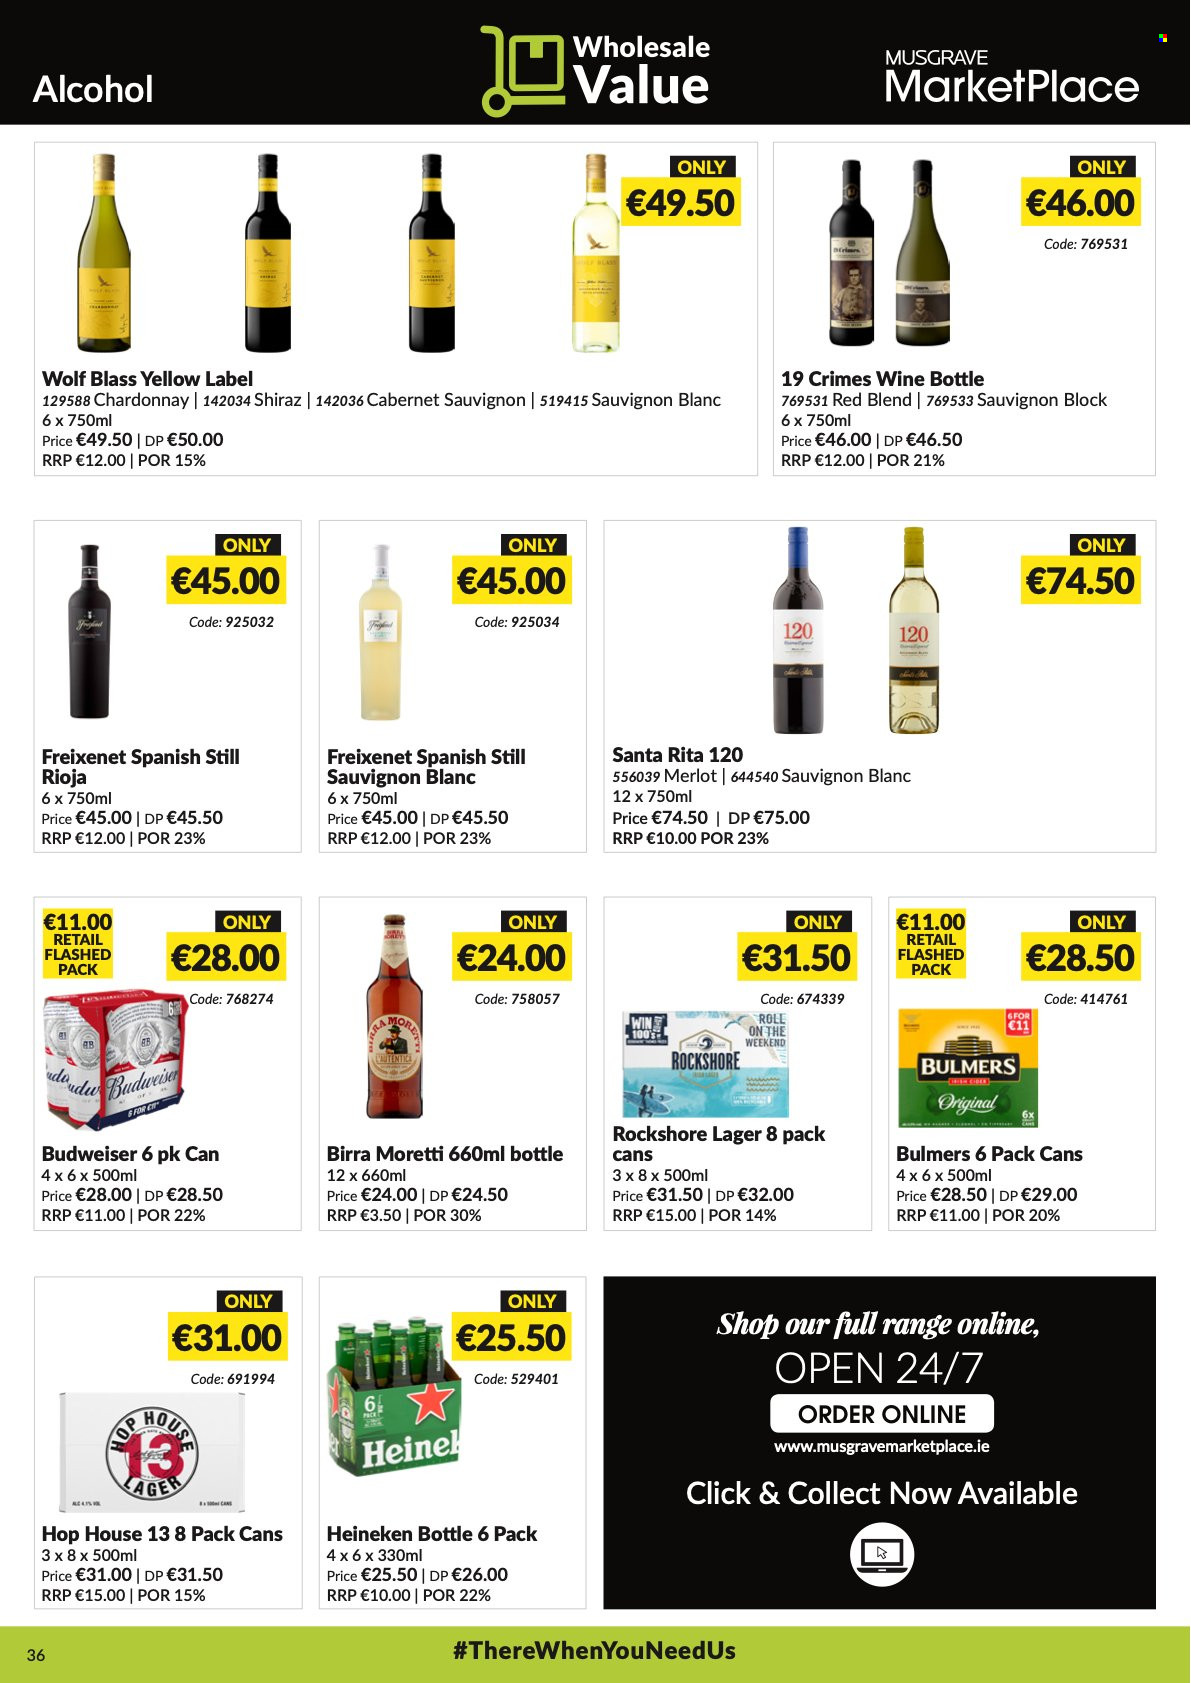 thumbnail - MUSGRAVE Market Place offer  - 26.09.2021 - 23.10.2021 - Sales products - Cabernet Sauvignon, red wine, white wine, Chardonnay, wine, Merlot, alcohol, Shiraz, Sauvignon Blanc, beer, Heineken, Bulmers, Lager, Rockshore, roll-on, Budweiser. Page 36.